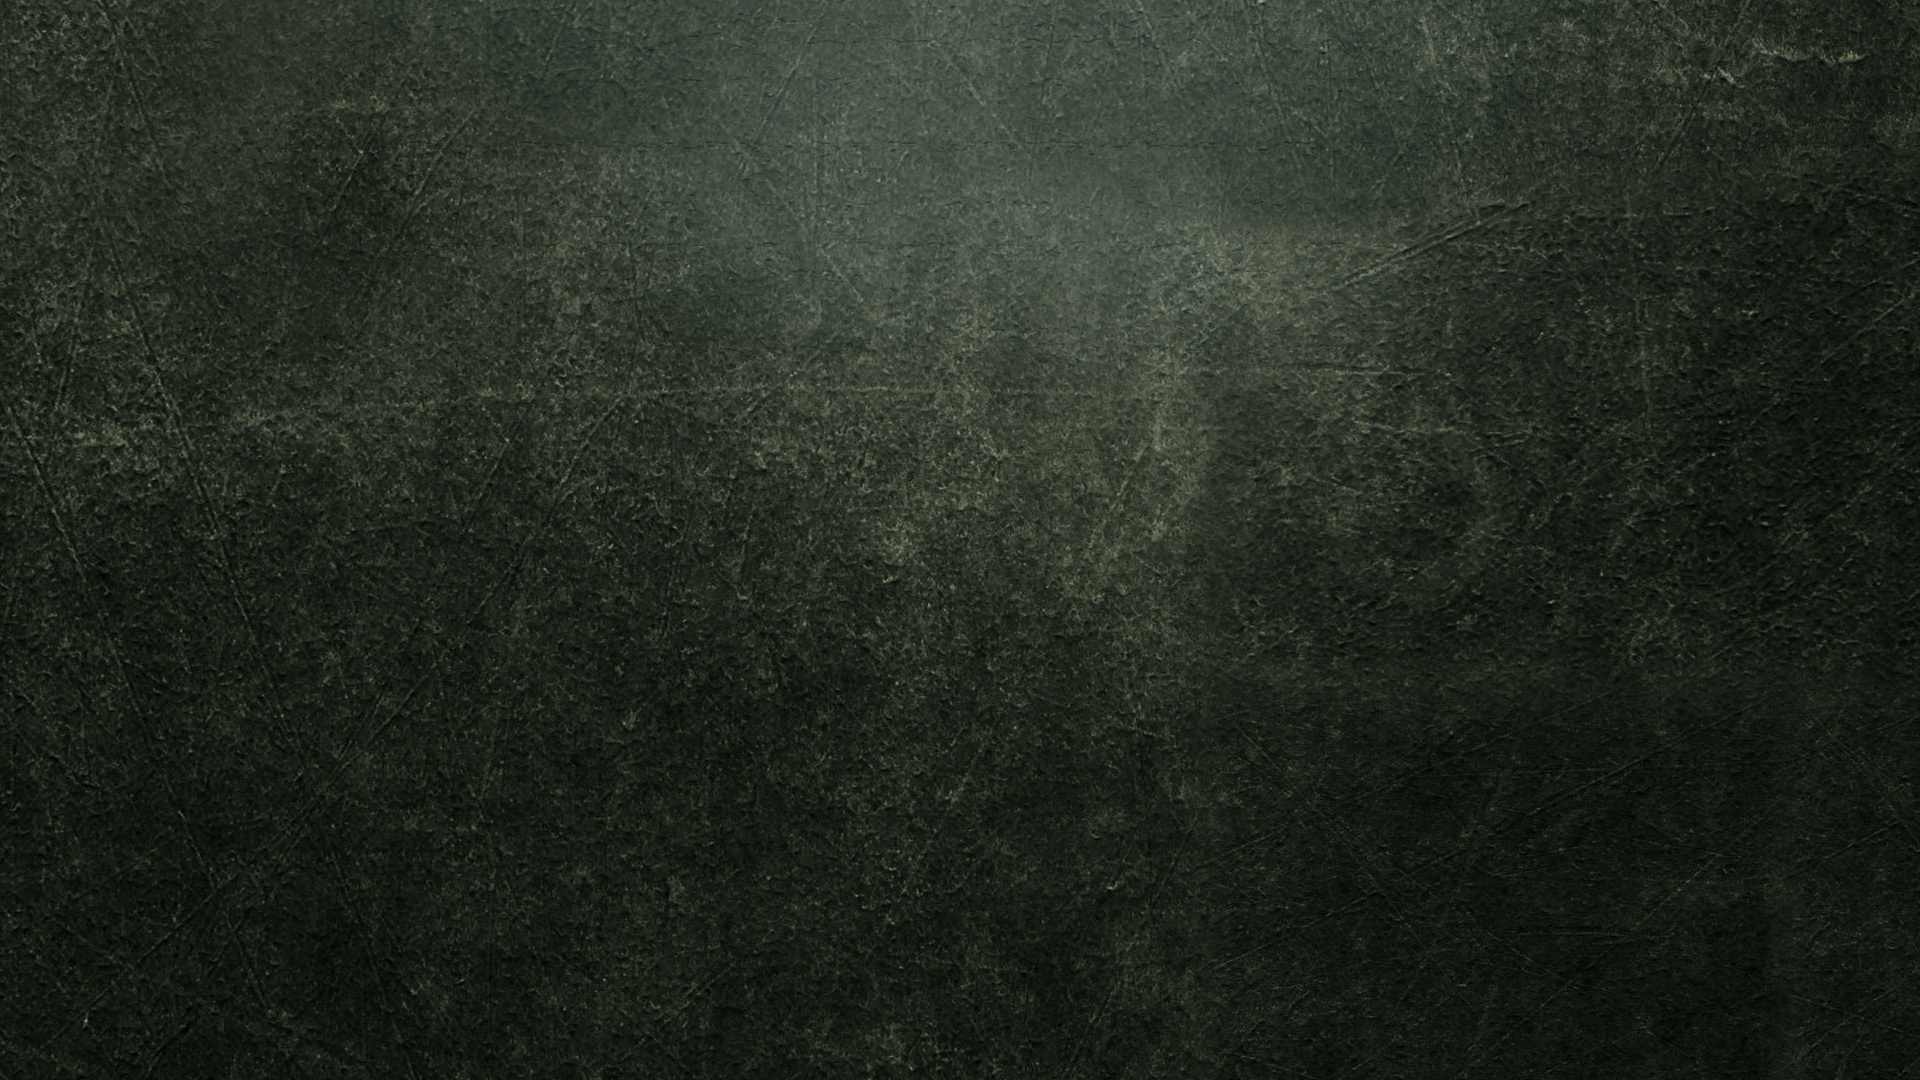 Green and Black Abstract Painting. Wallpaper in 1920x1080 Resolution